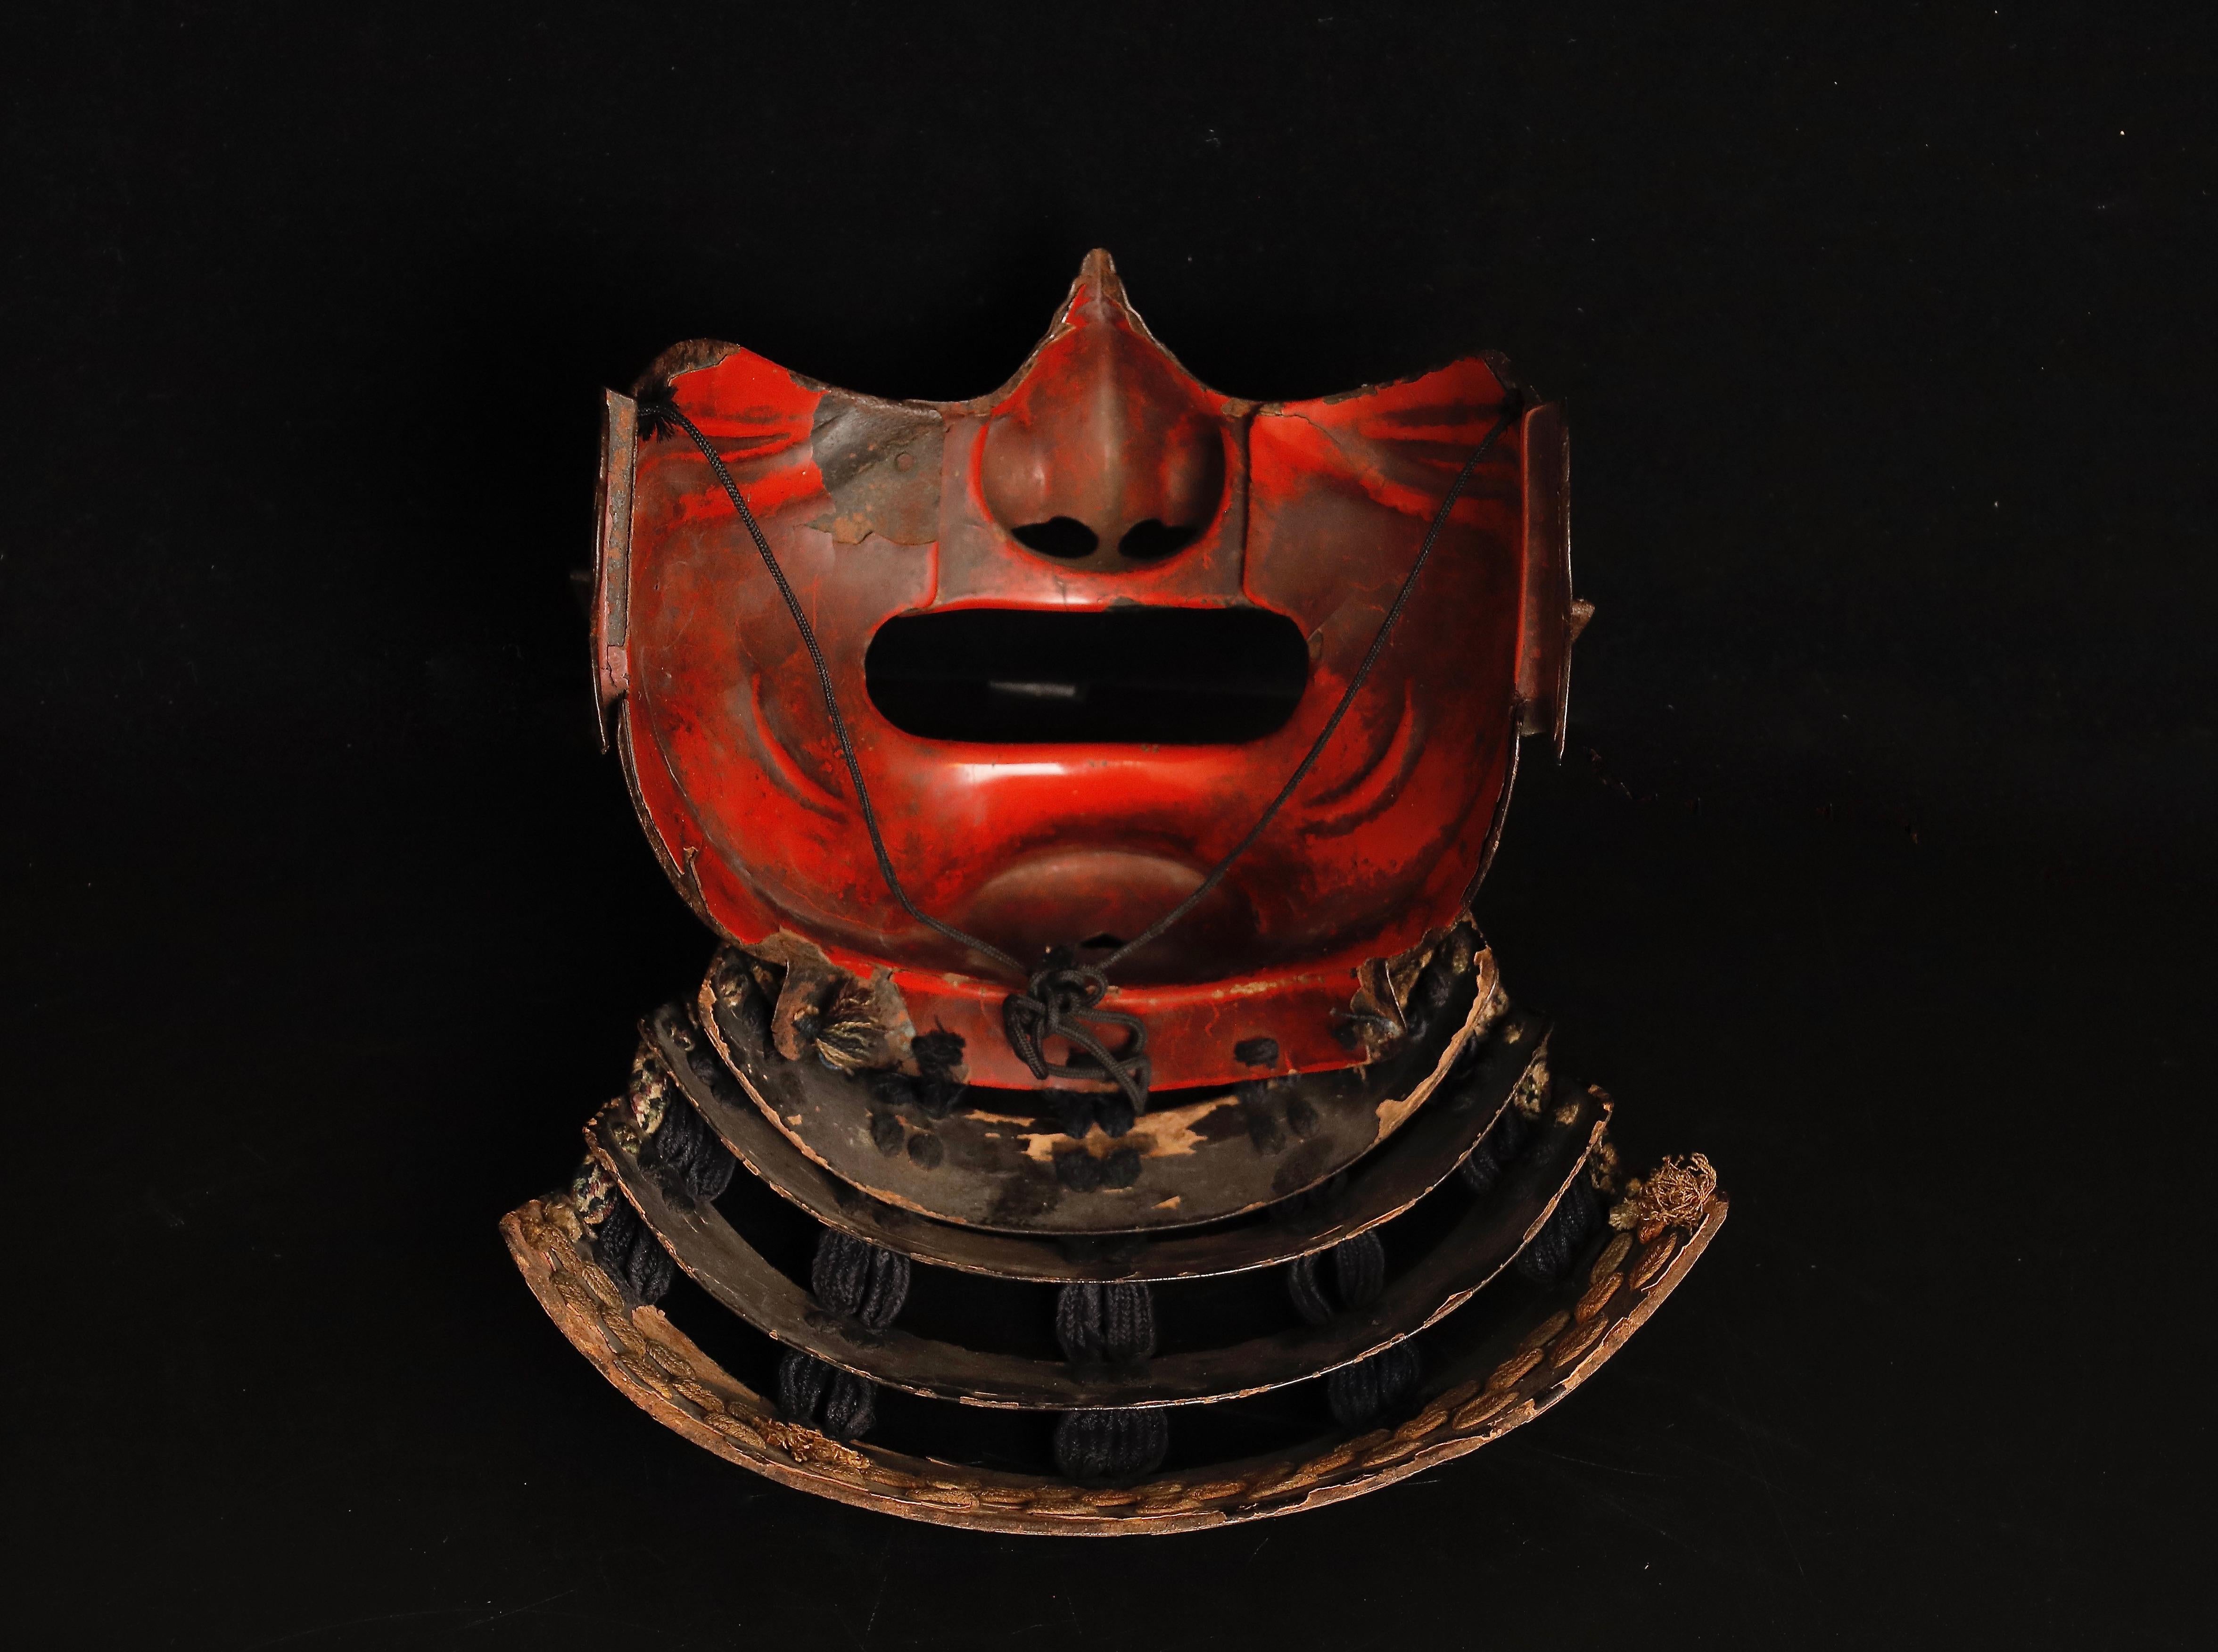 Edo-Era Samurai Helmet and Mask Set, an Authentic Piece of History from the 17th 10